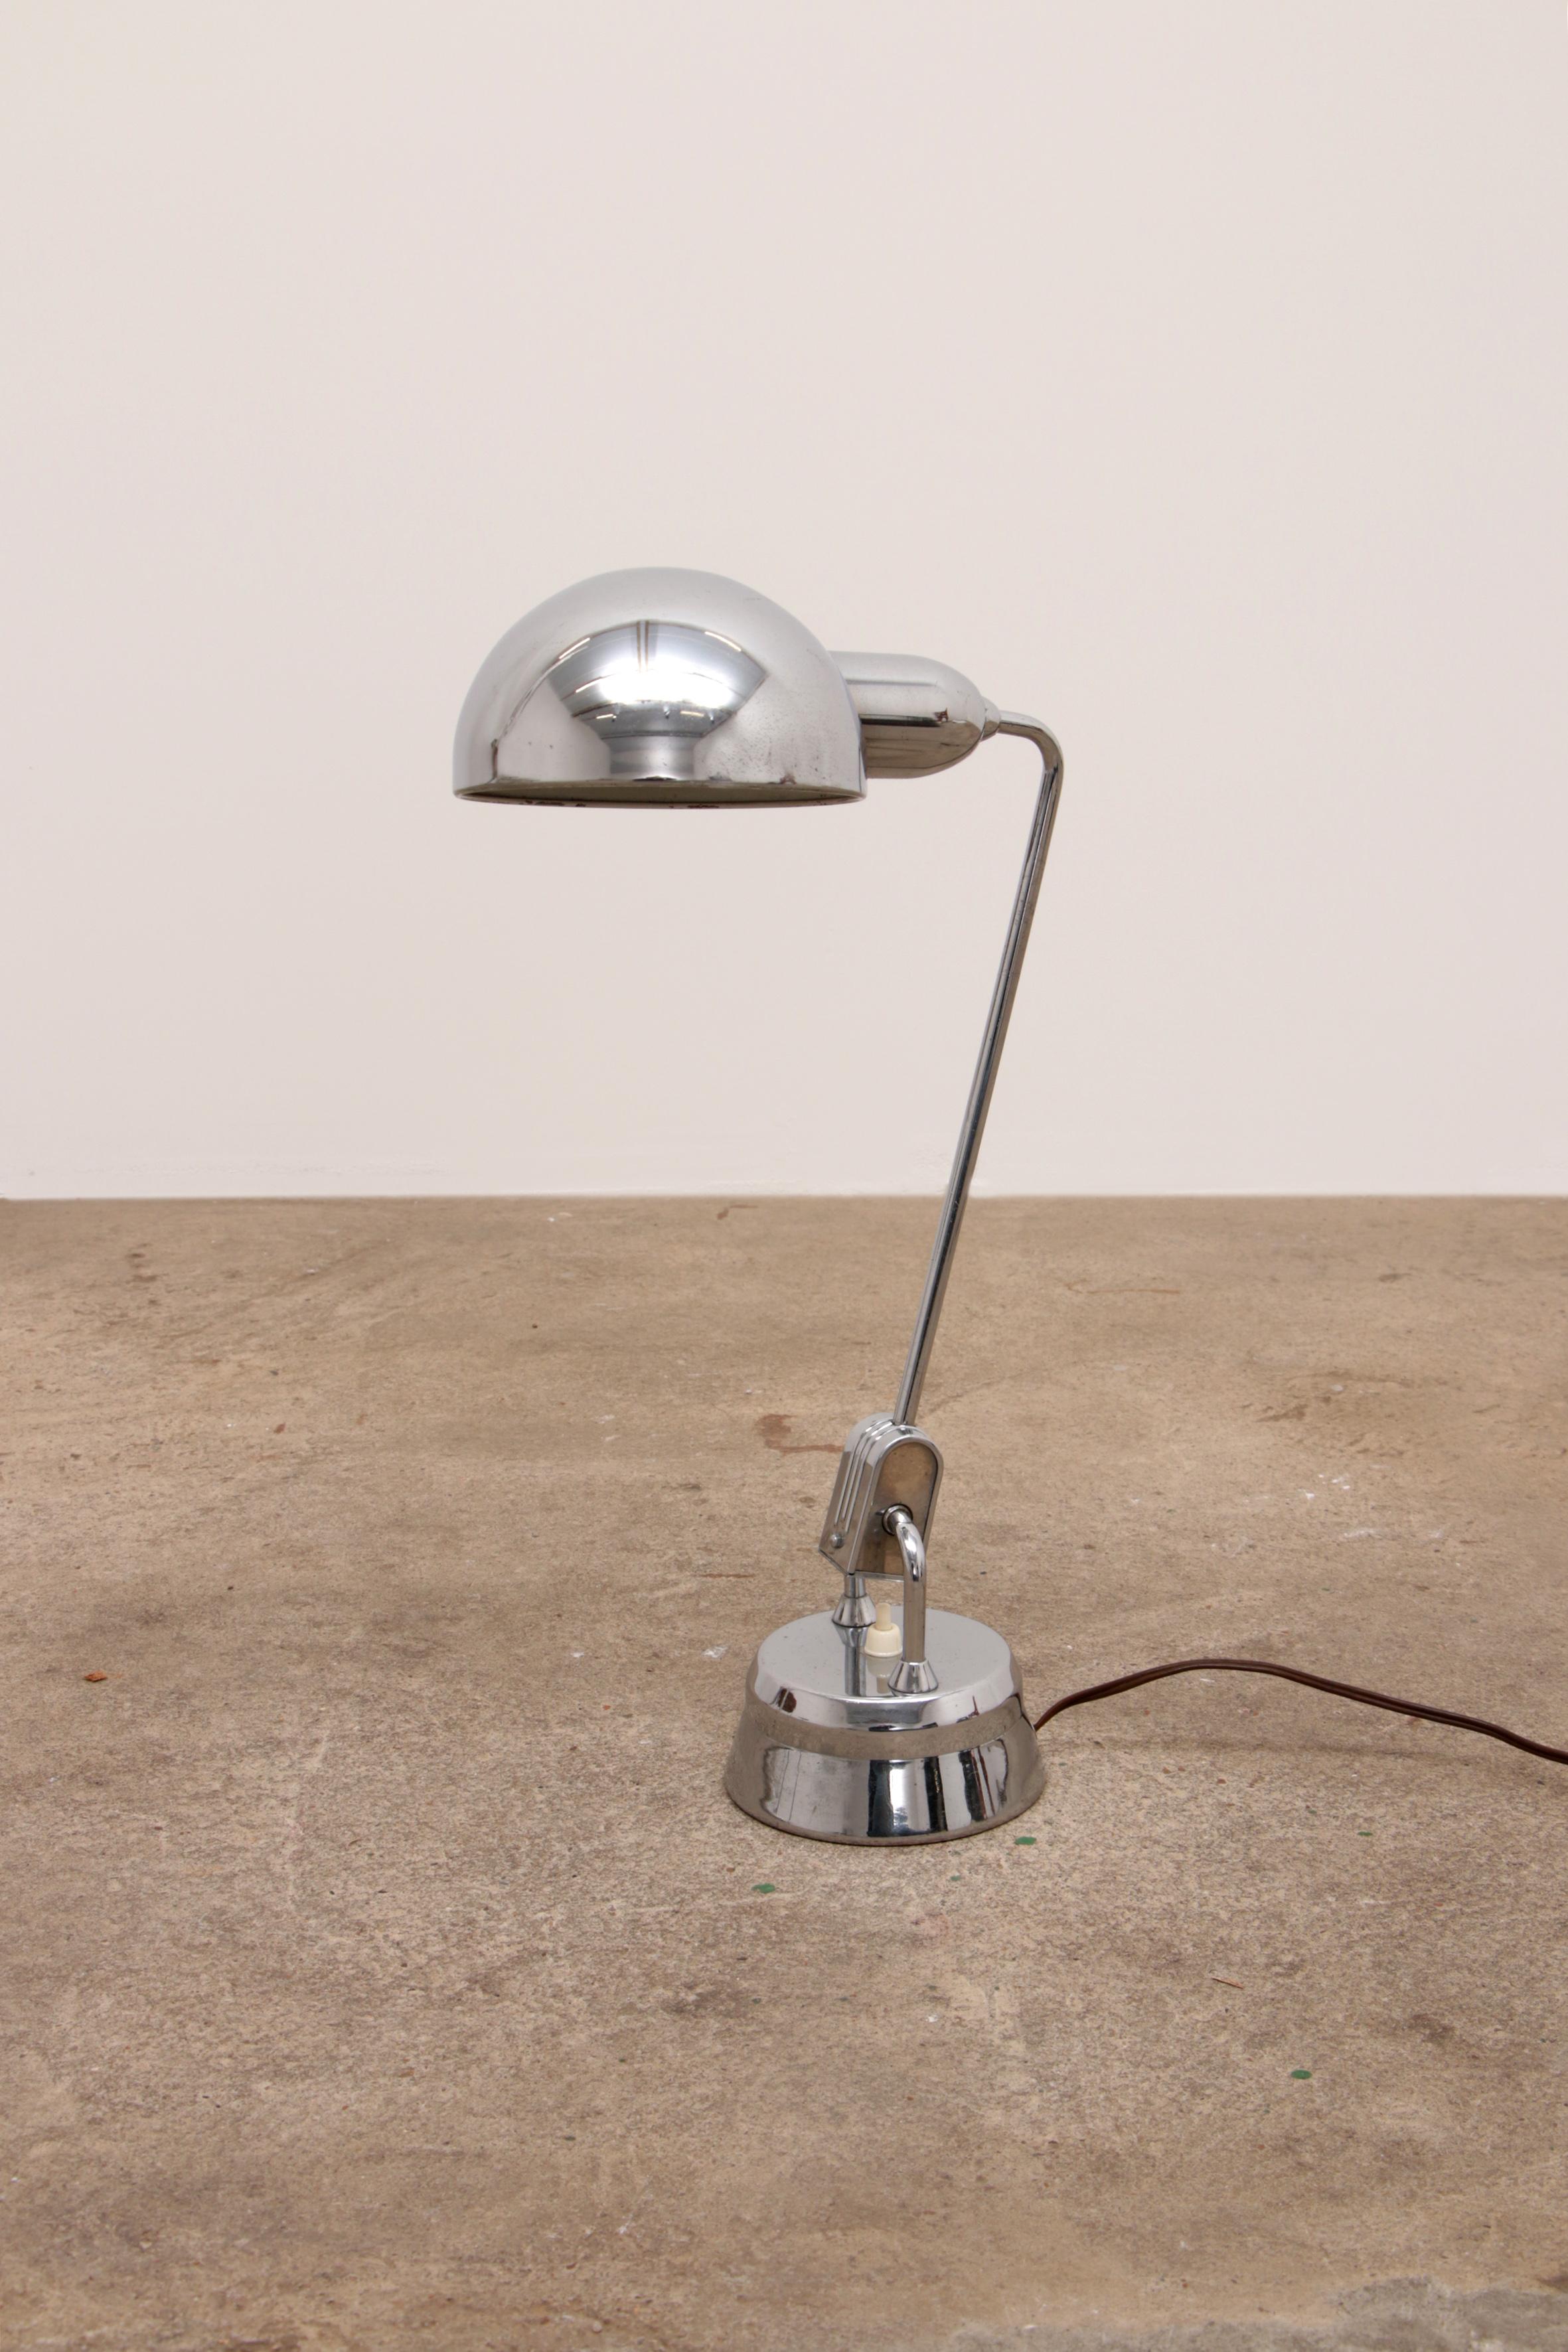 The 600 desk lamp by the French manufacturer JUMO is one of Charlotte Perriand's most famous lamp designs. Designed in 1935, it was selected by Perriand himself for the 1949 exhibition 